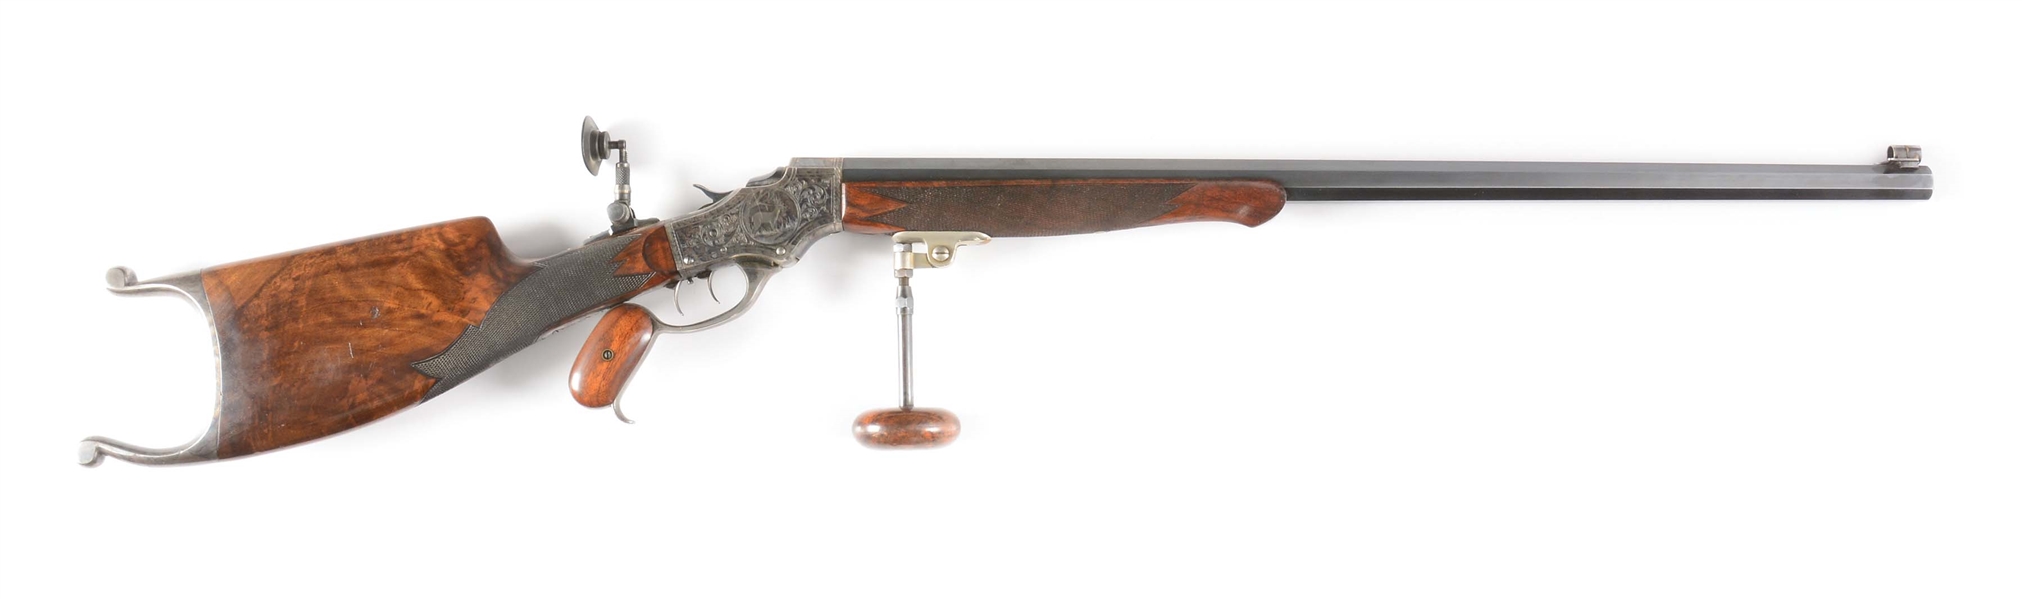 (C) STEVENS 44-1/2 ACTION MODEL 54 WITH GAME SCENE ENGRAVING WITH HOFFMAN BARREL.